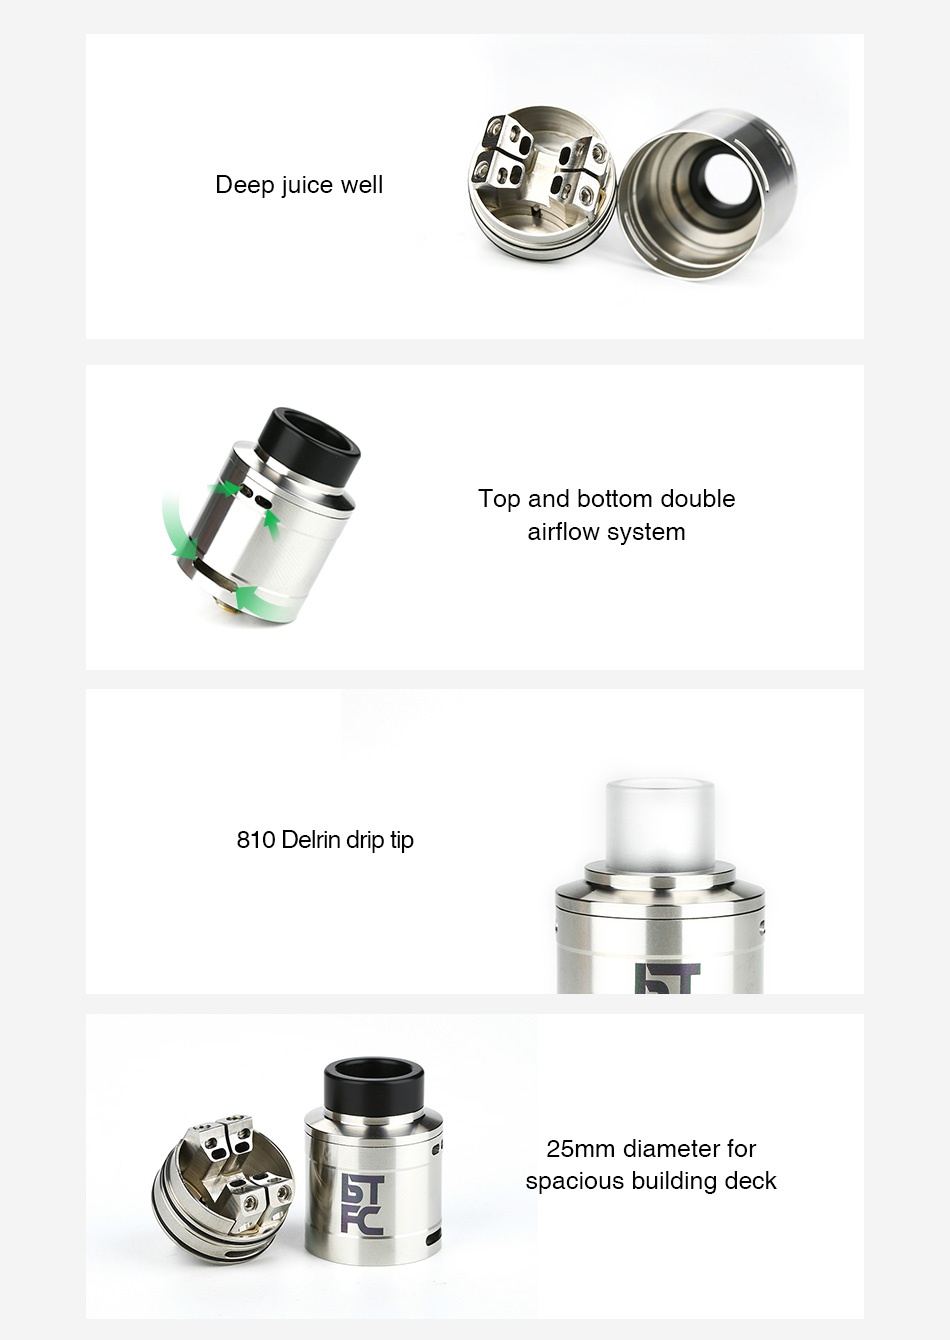 AUGVAPE BTFC RDA Deep juice wel op and bottom double airflow system 810 Delrin drip tip 25mm diameter for 5 spacious building deck